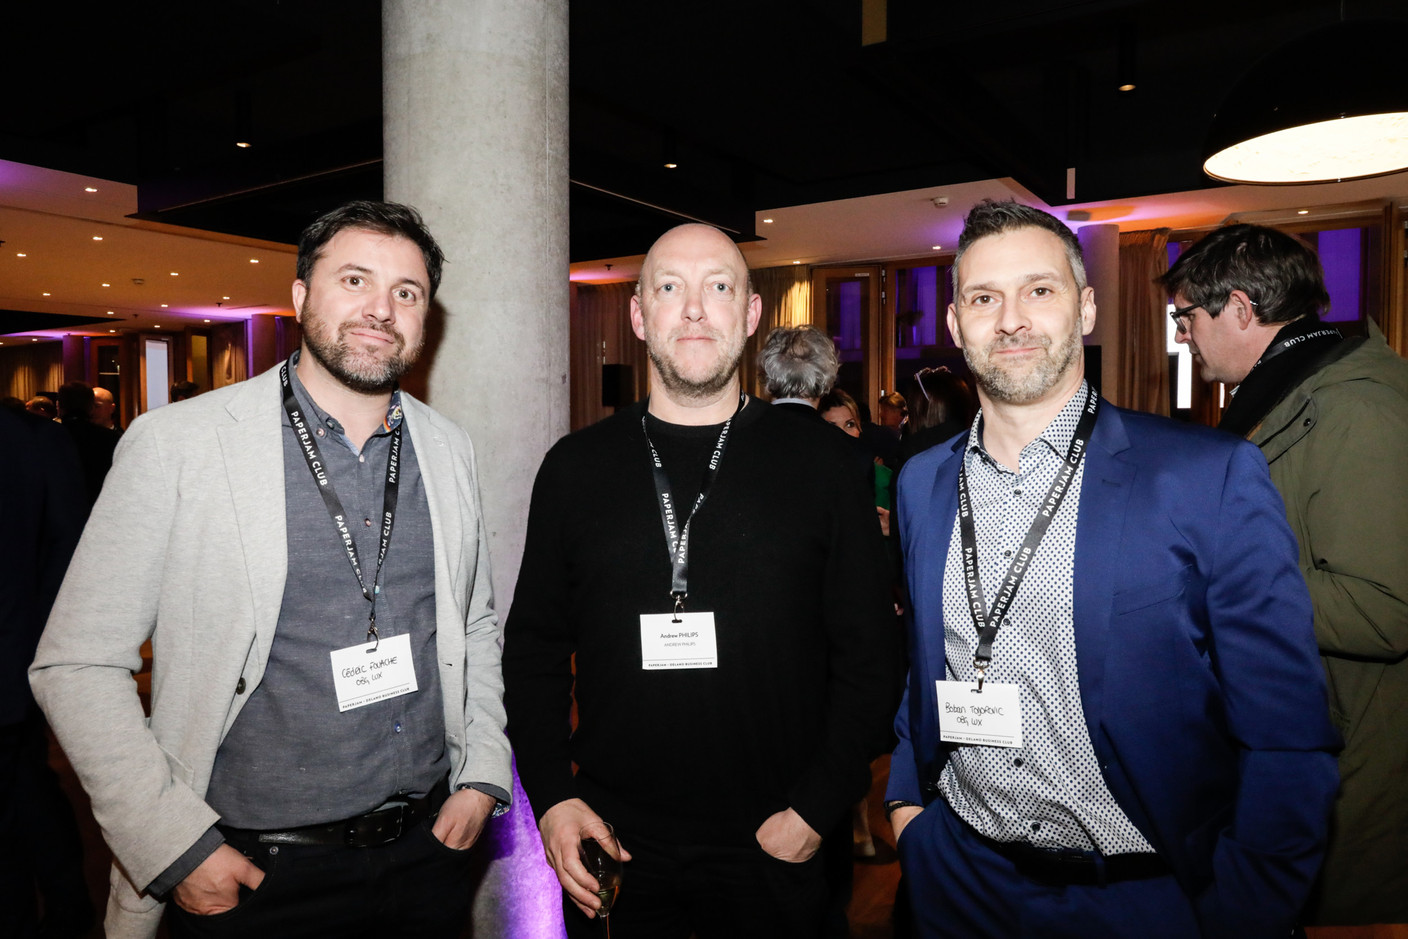 Cadric Fouache (OBG Lux), Andrew Philips (Andrew Philips) and Boban Todorovic (OBG Lux). Photo: Marie Russillo/Maison Moderne